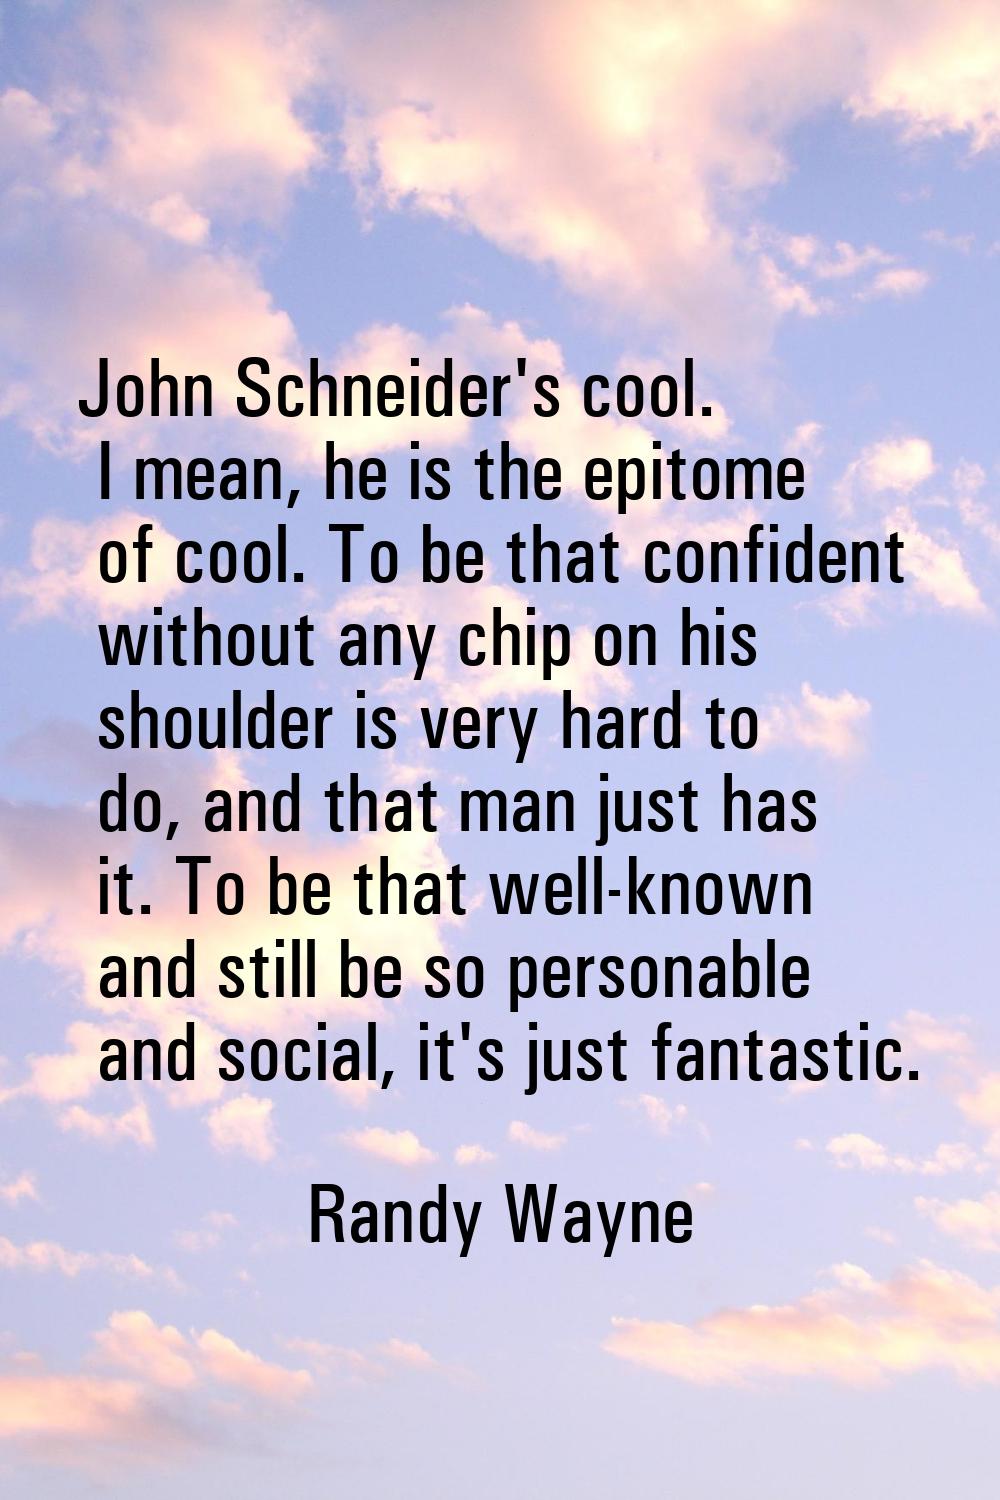 John Schneider's cool. I mean, he is the epitome of cool. To be that confident without any chip on 